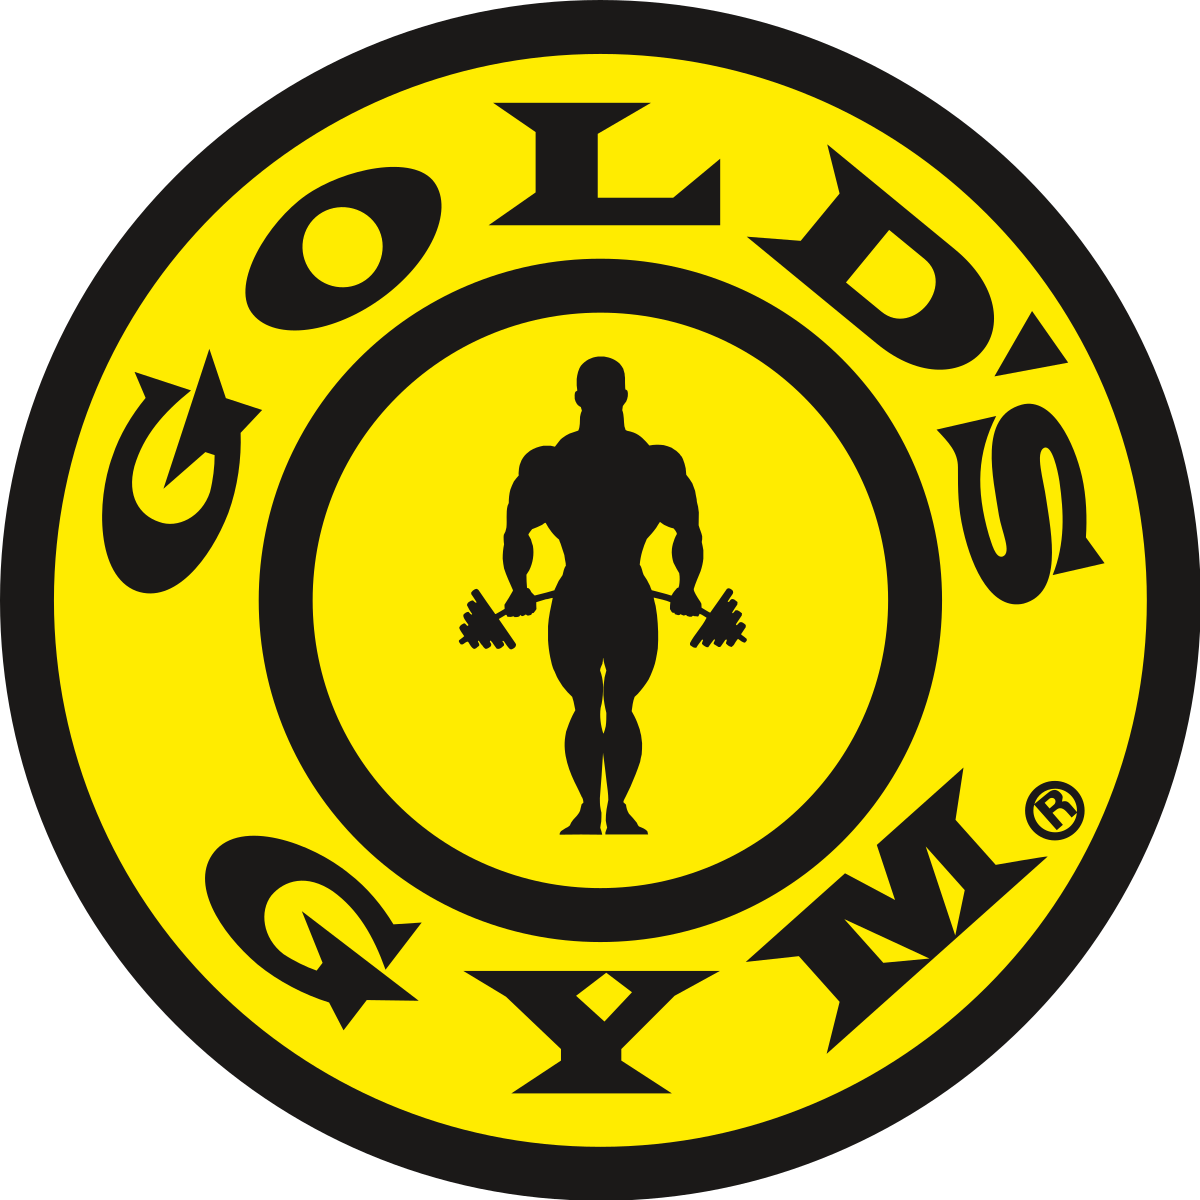 Gold's Gym Nutrition